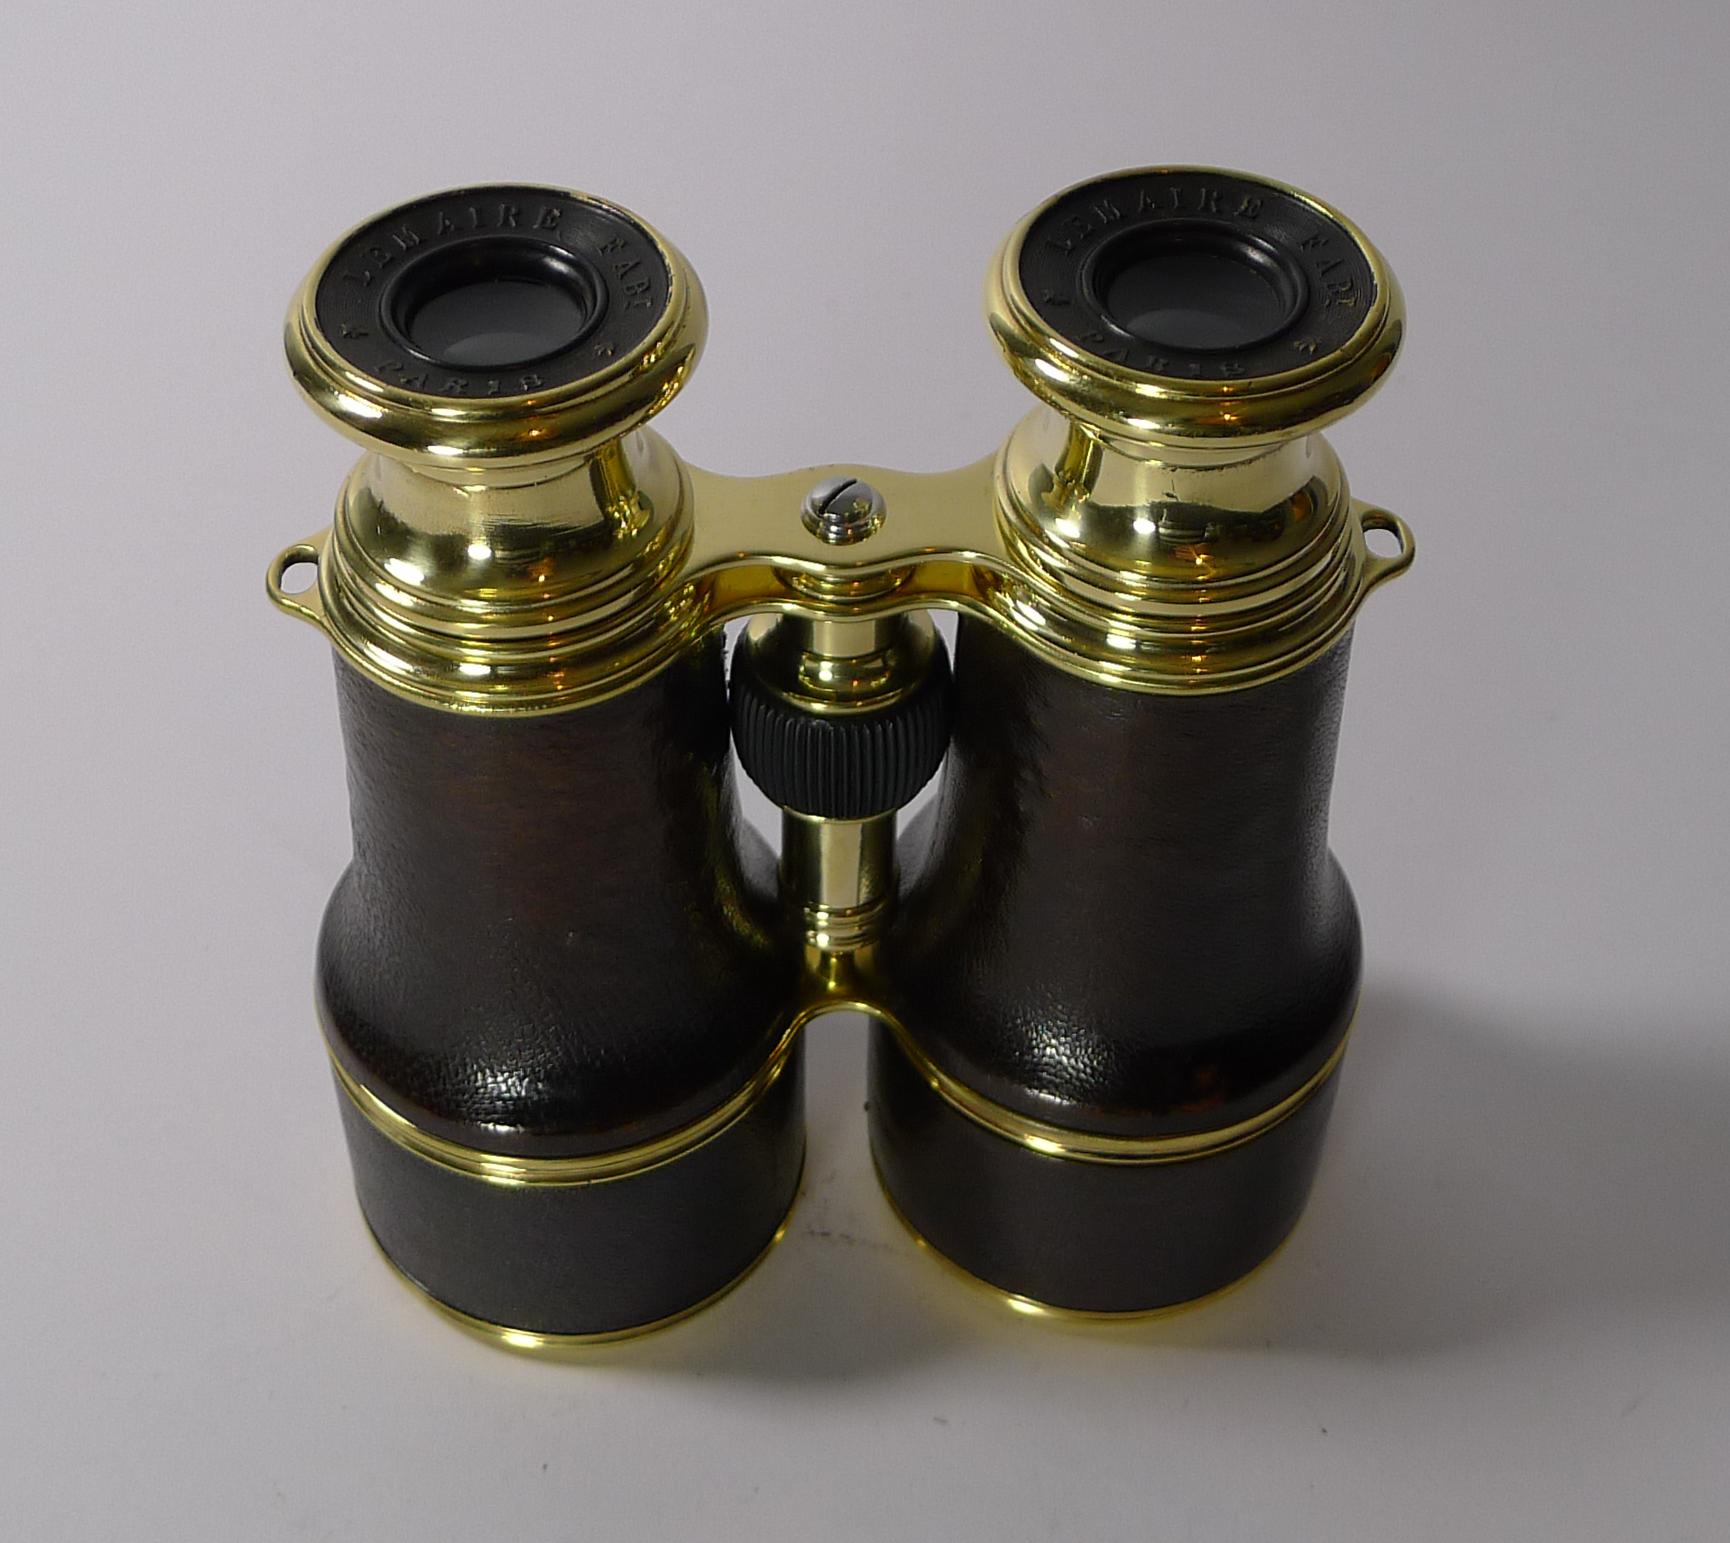 Pair WW1 Binoculars and Case - British Officer's Issue - 1917 - LeMaire, Paris 4